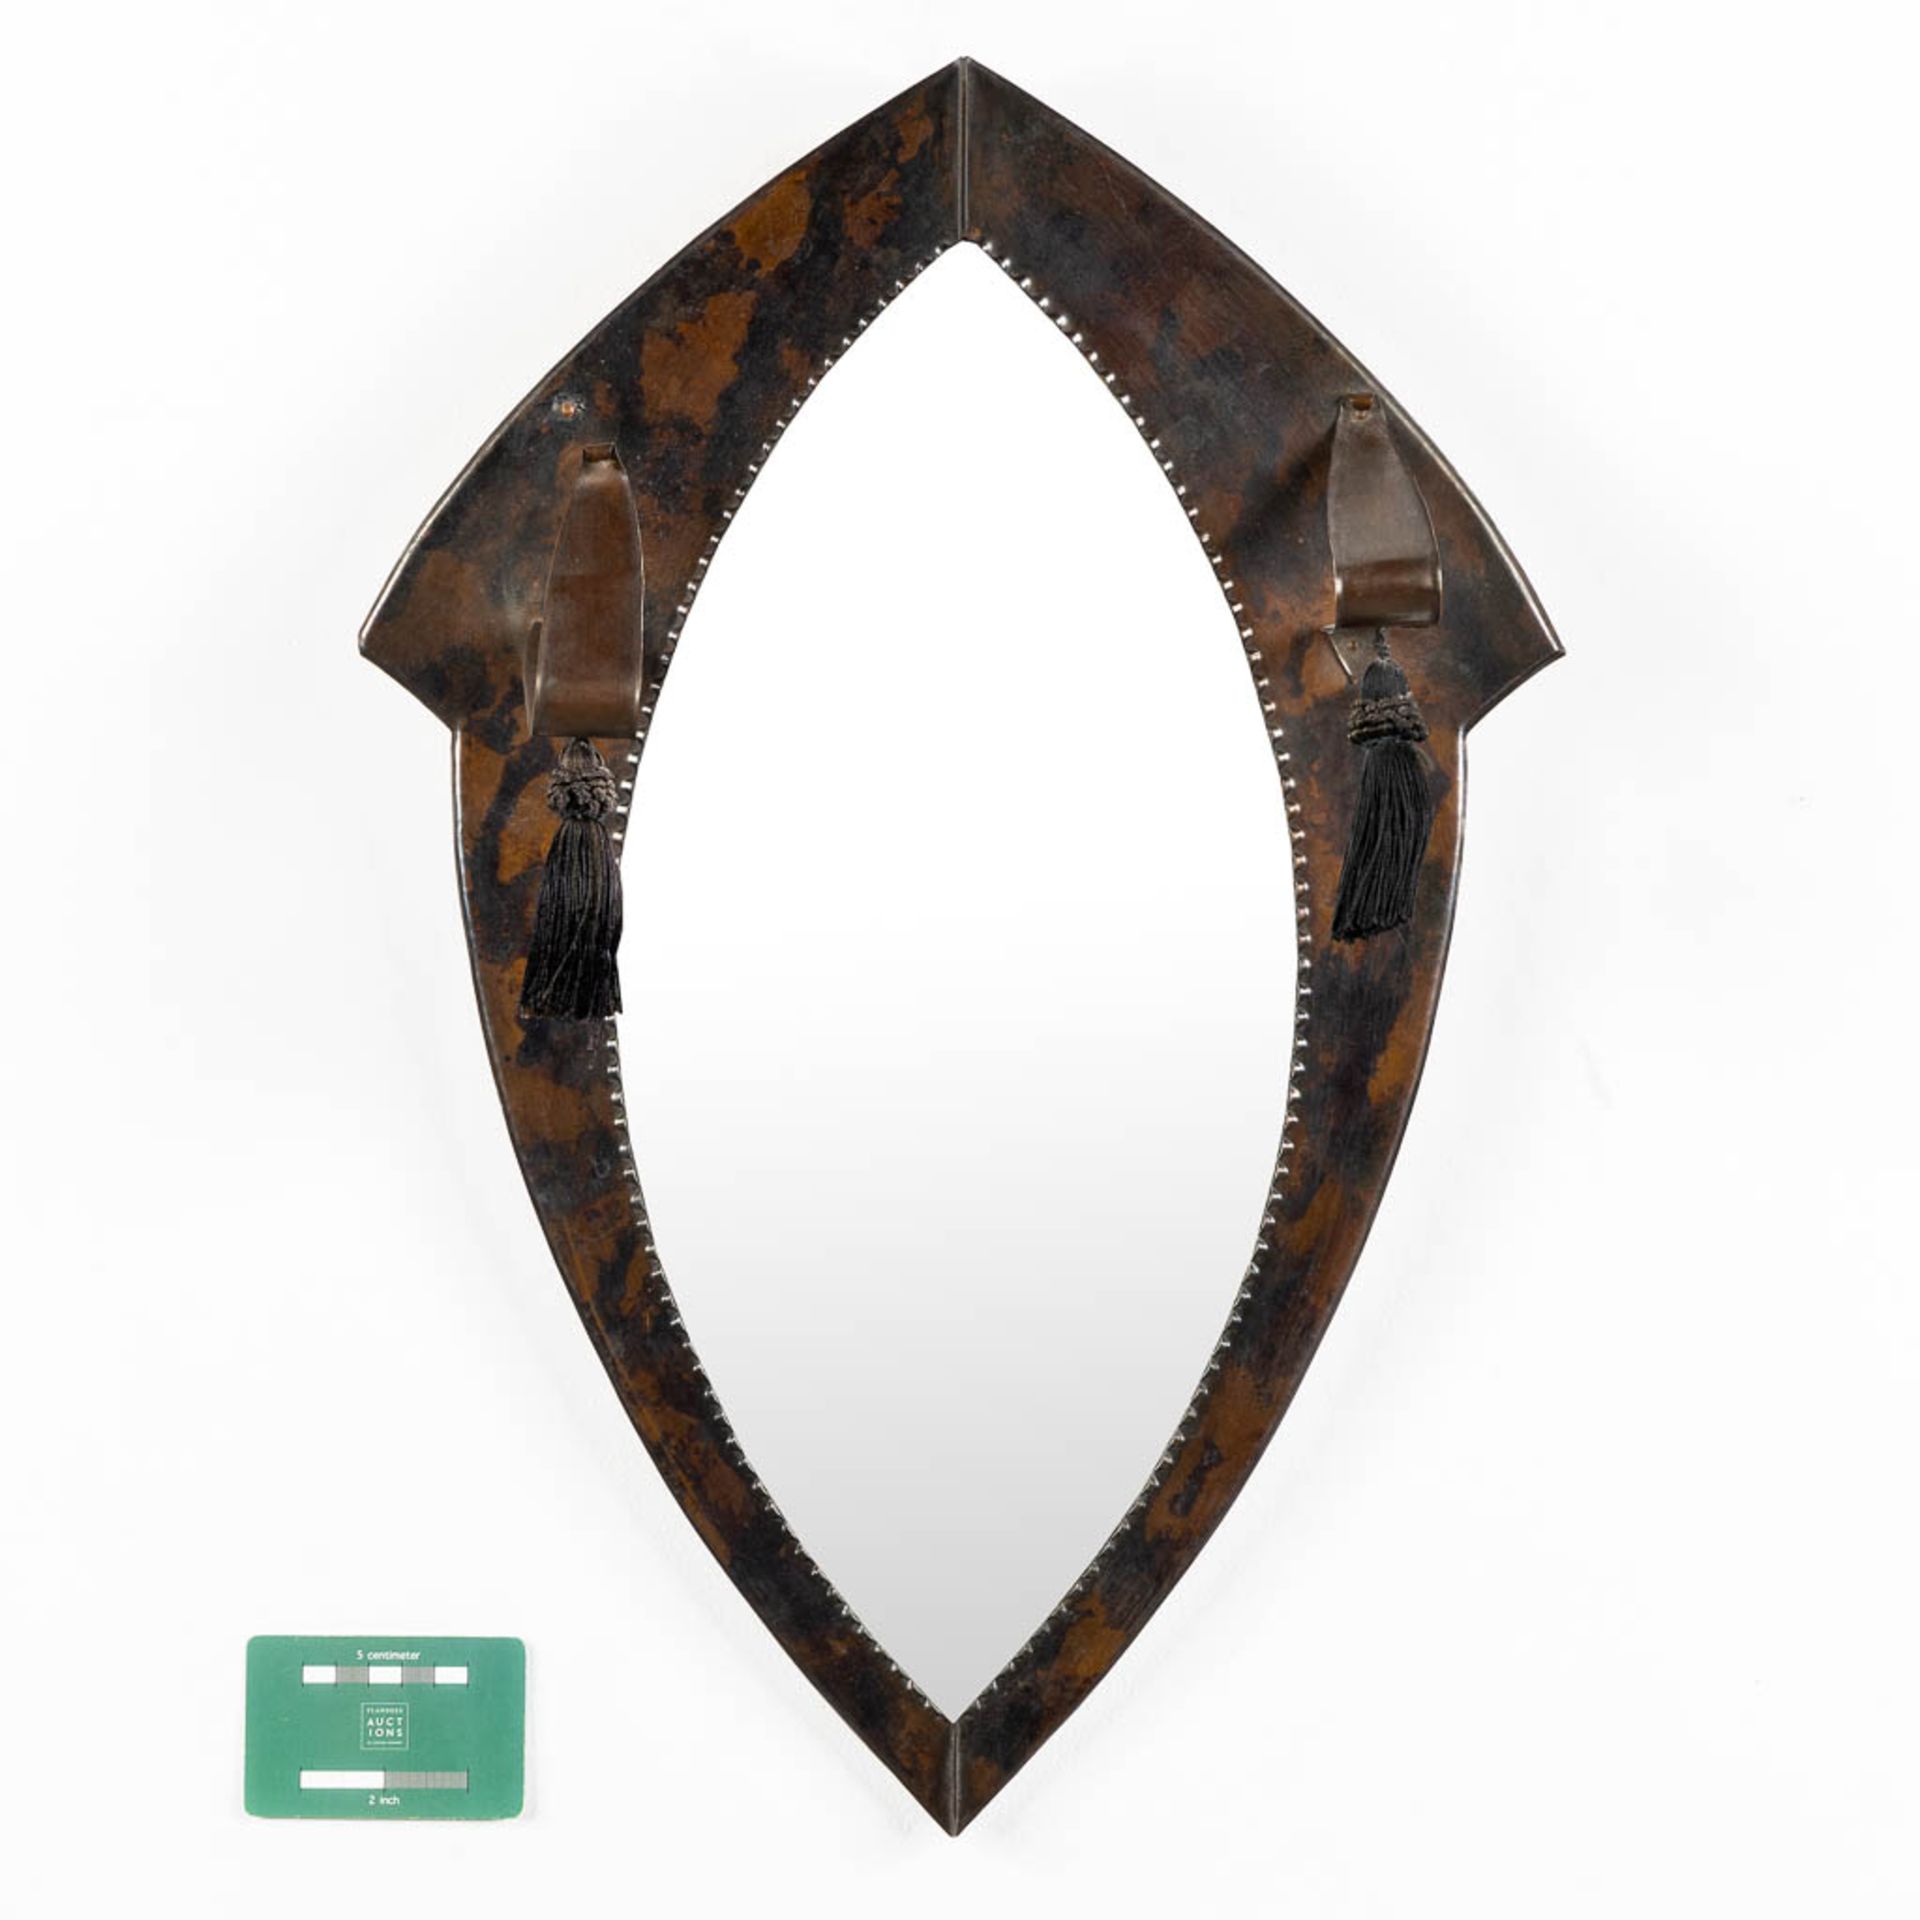 Two Mirrors, hammered copper, Amsterdam School, Art Deco. (W:36 x H:54 cm) - Image 3 of 10